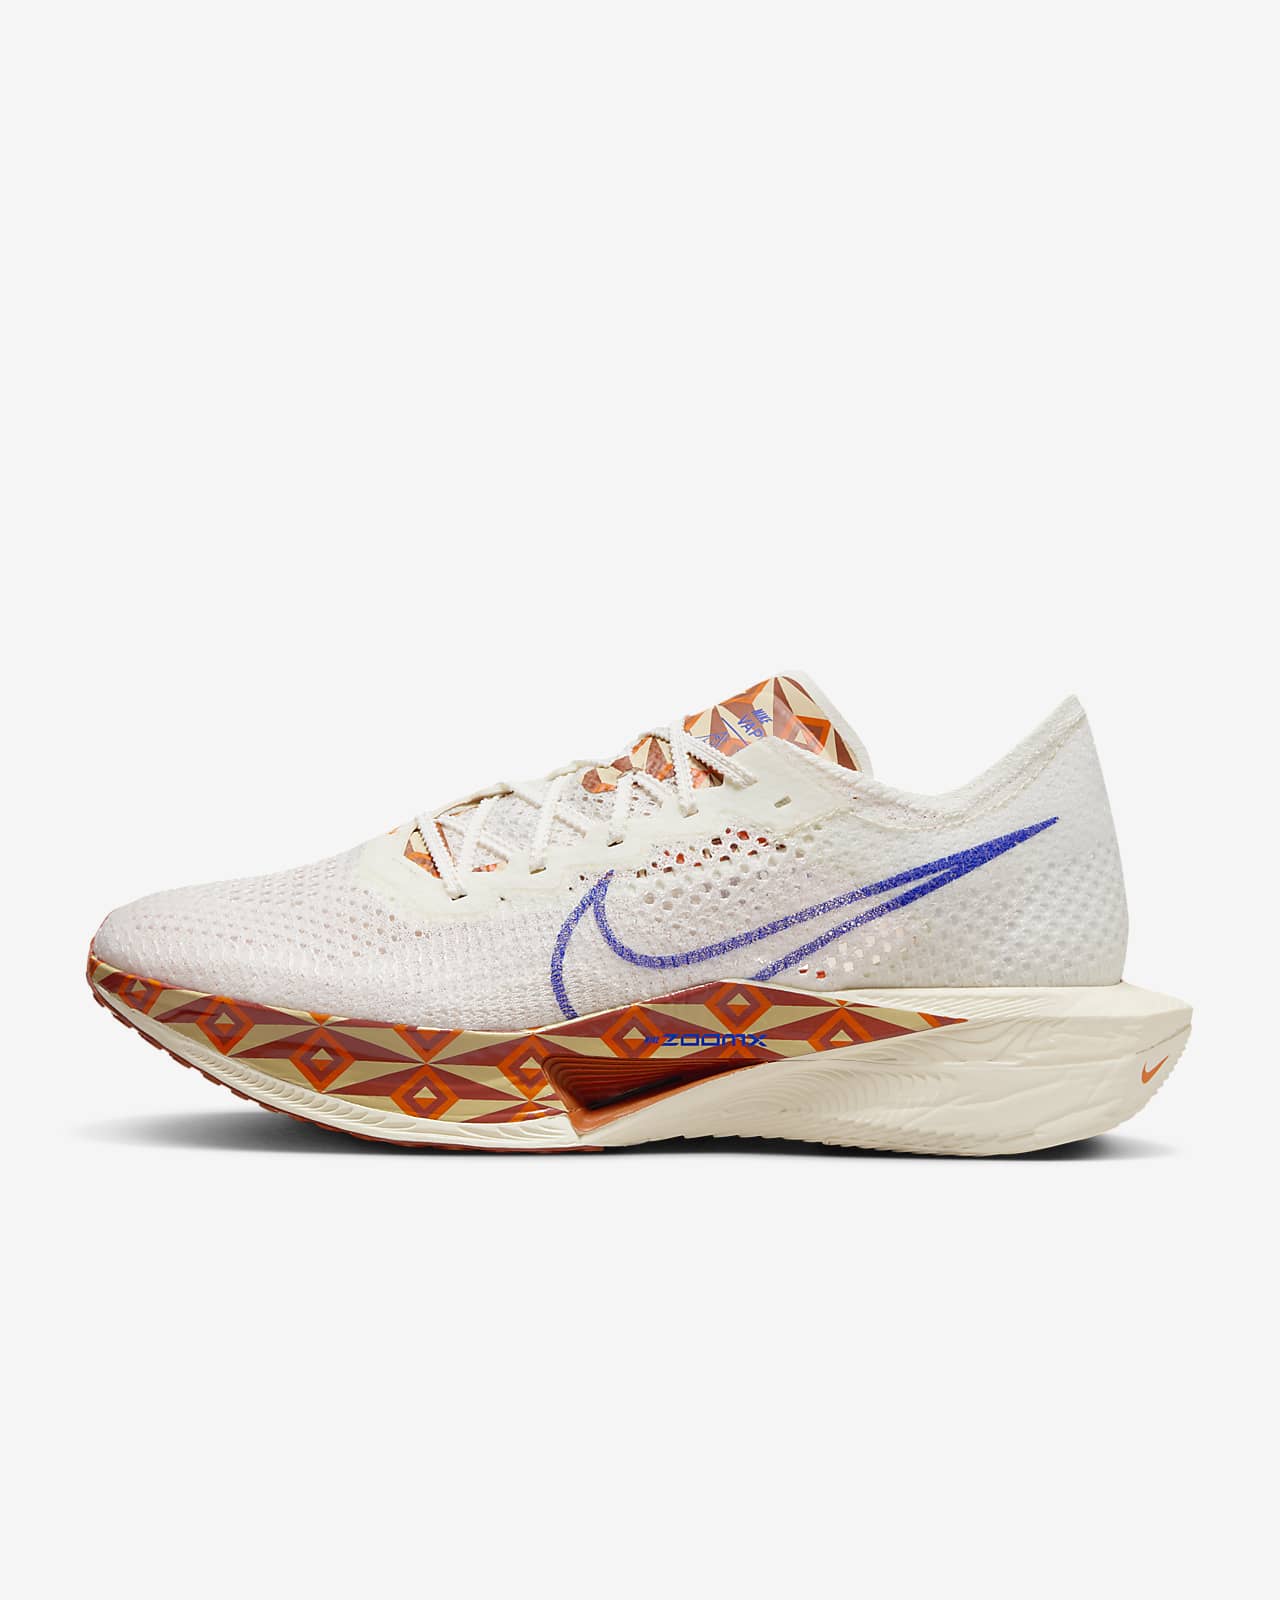 Nike Zoom Fly 3 Premium By YouNBY